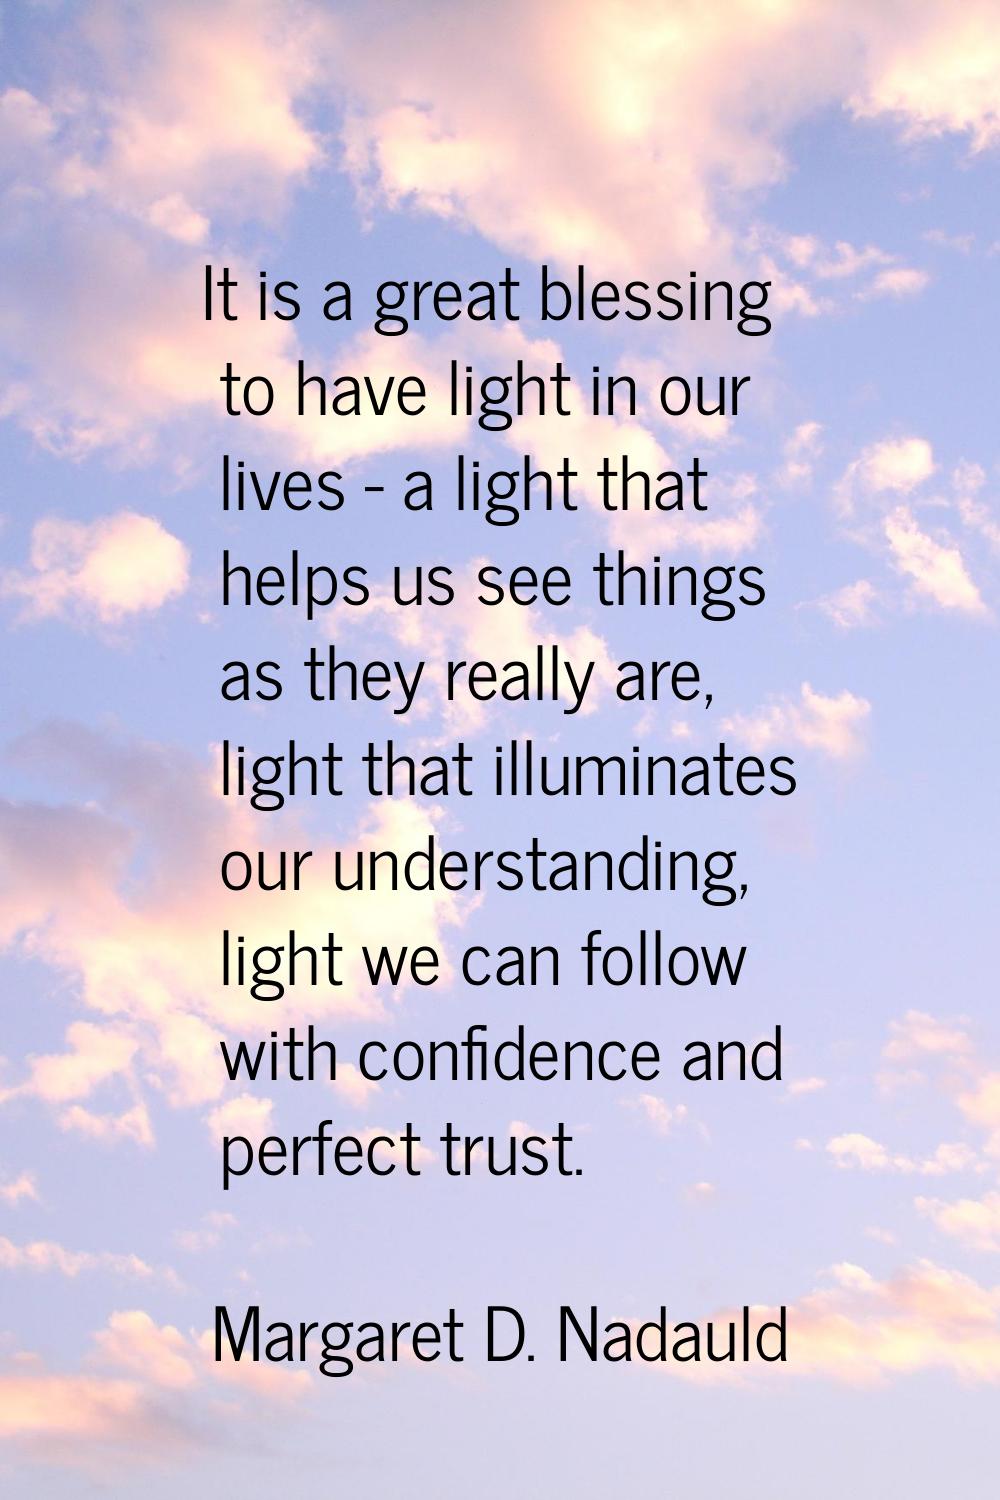 It is a great blessing to have light in our lives - a light that helps us see things as they really